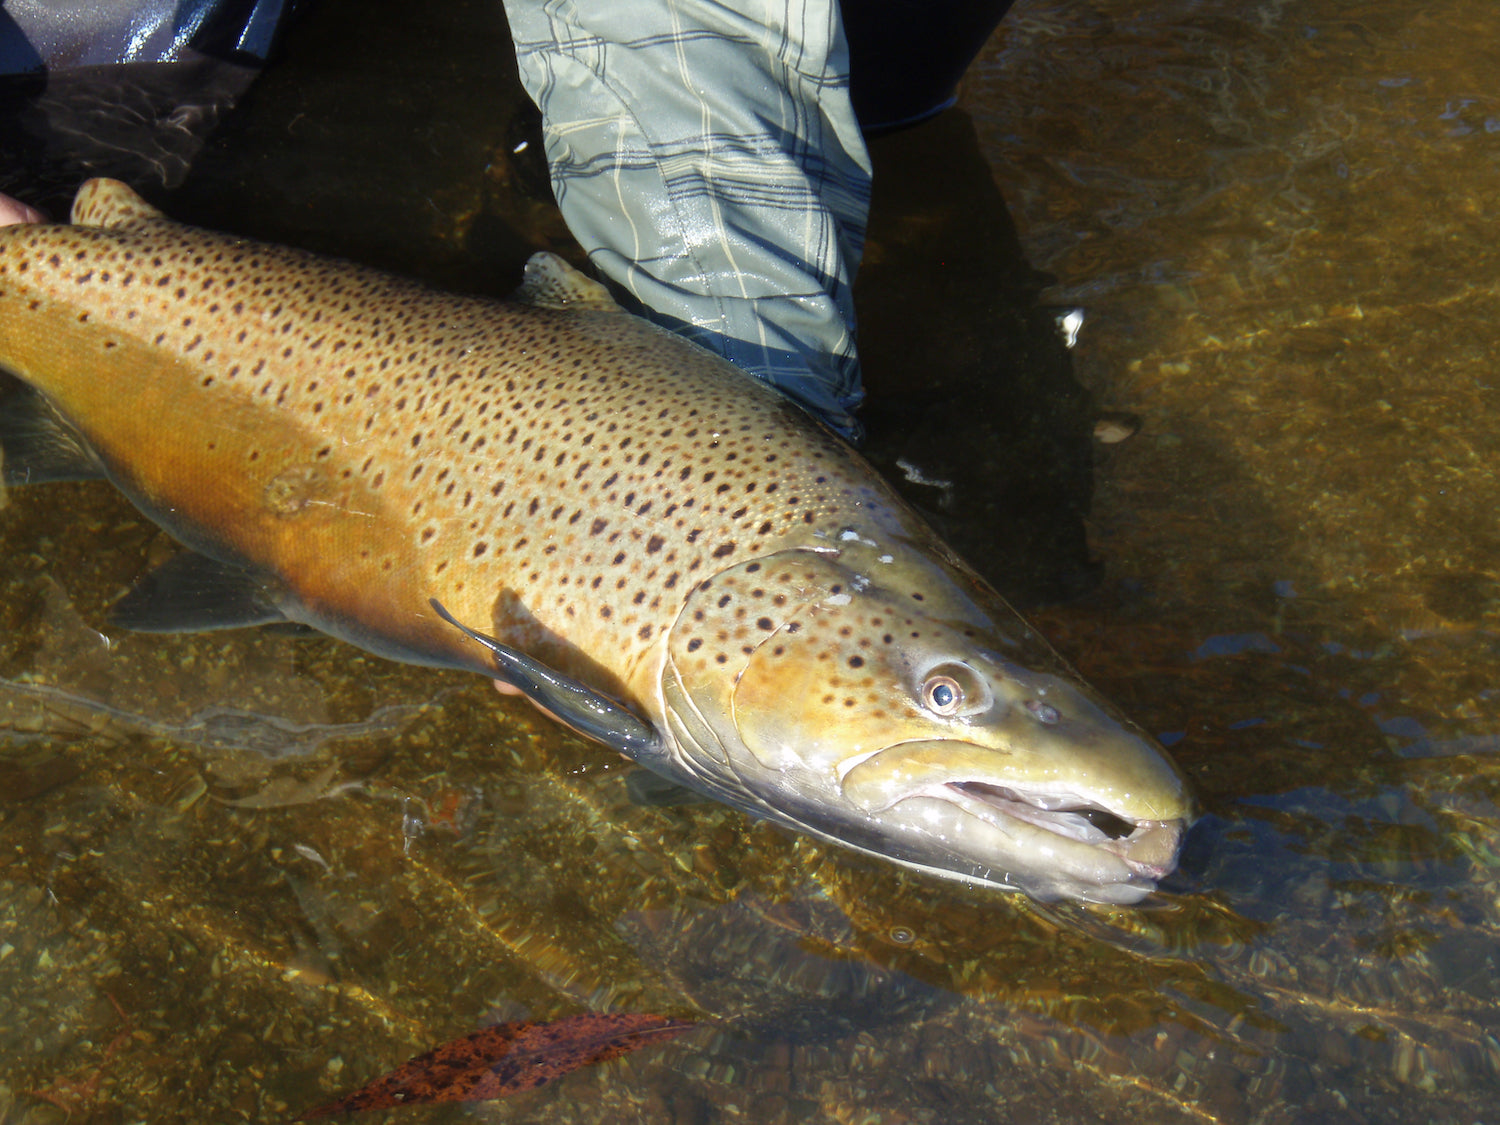 Fly Fishing for Great Lakes Brown Trout - Fly Fisherman